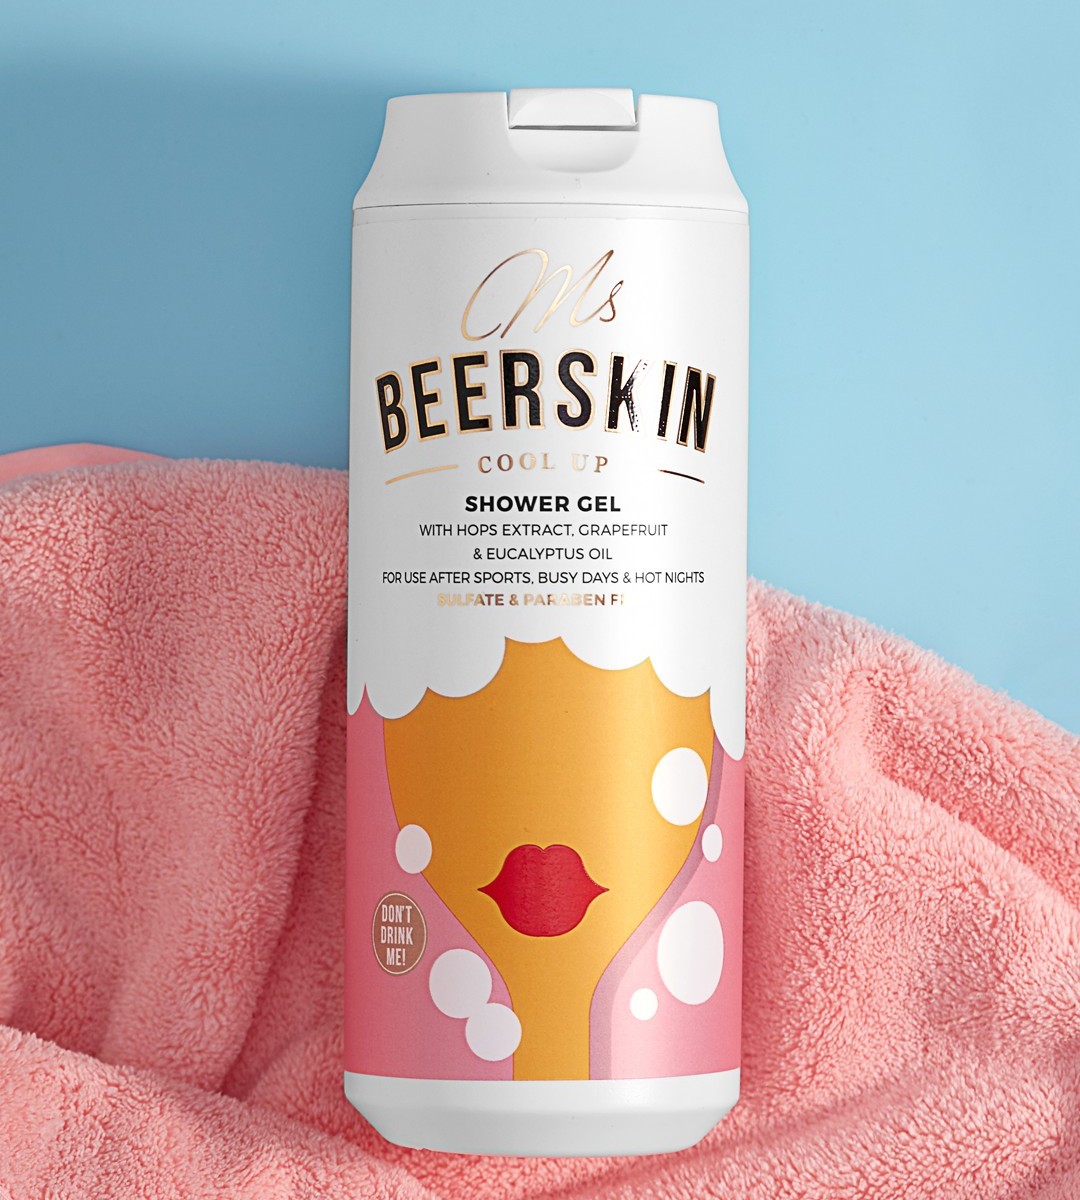 MS. BEERSKIN COOL UP SPRCHOVY GEL, 440 ML